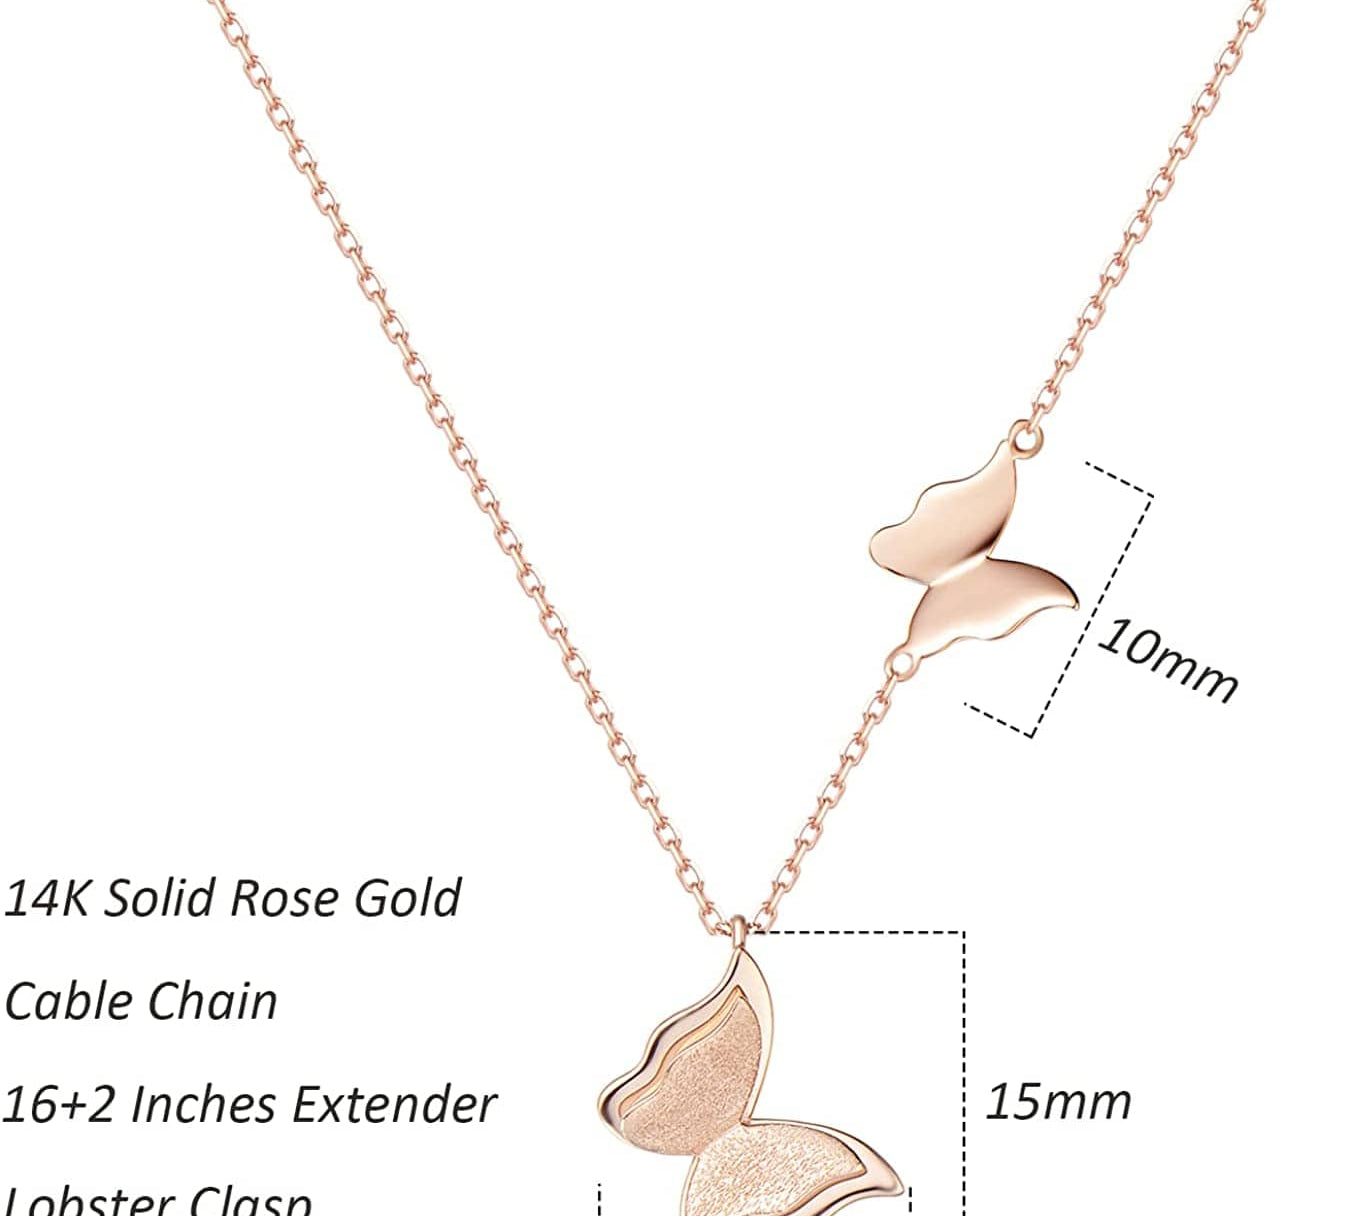 FANCIME "Twinkling Kiss" Butterfly 14K Rose Gold Necklace Size